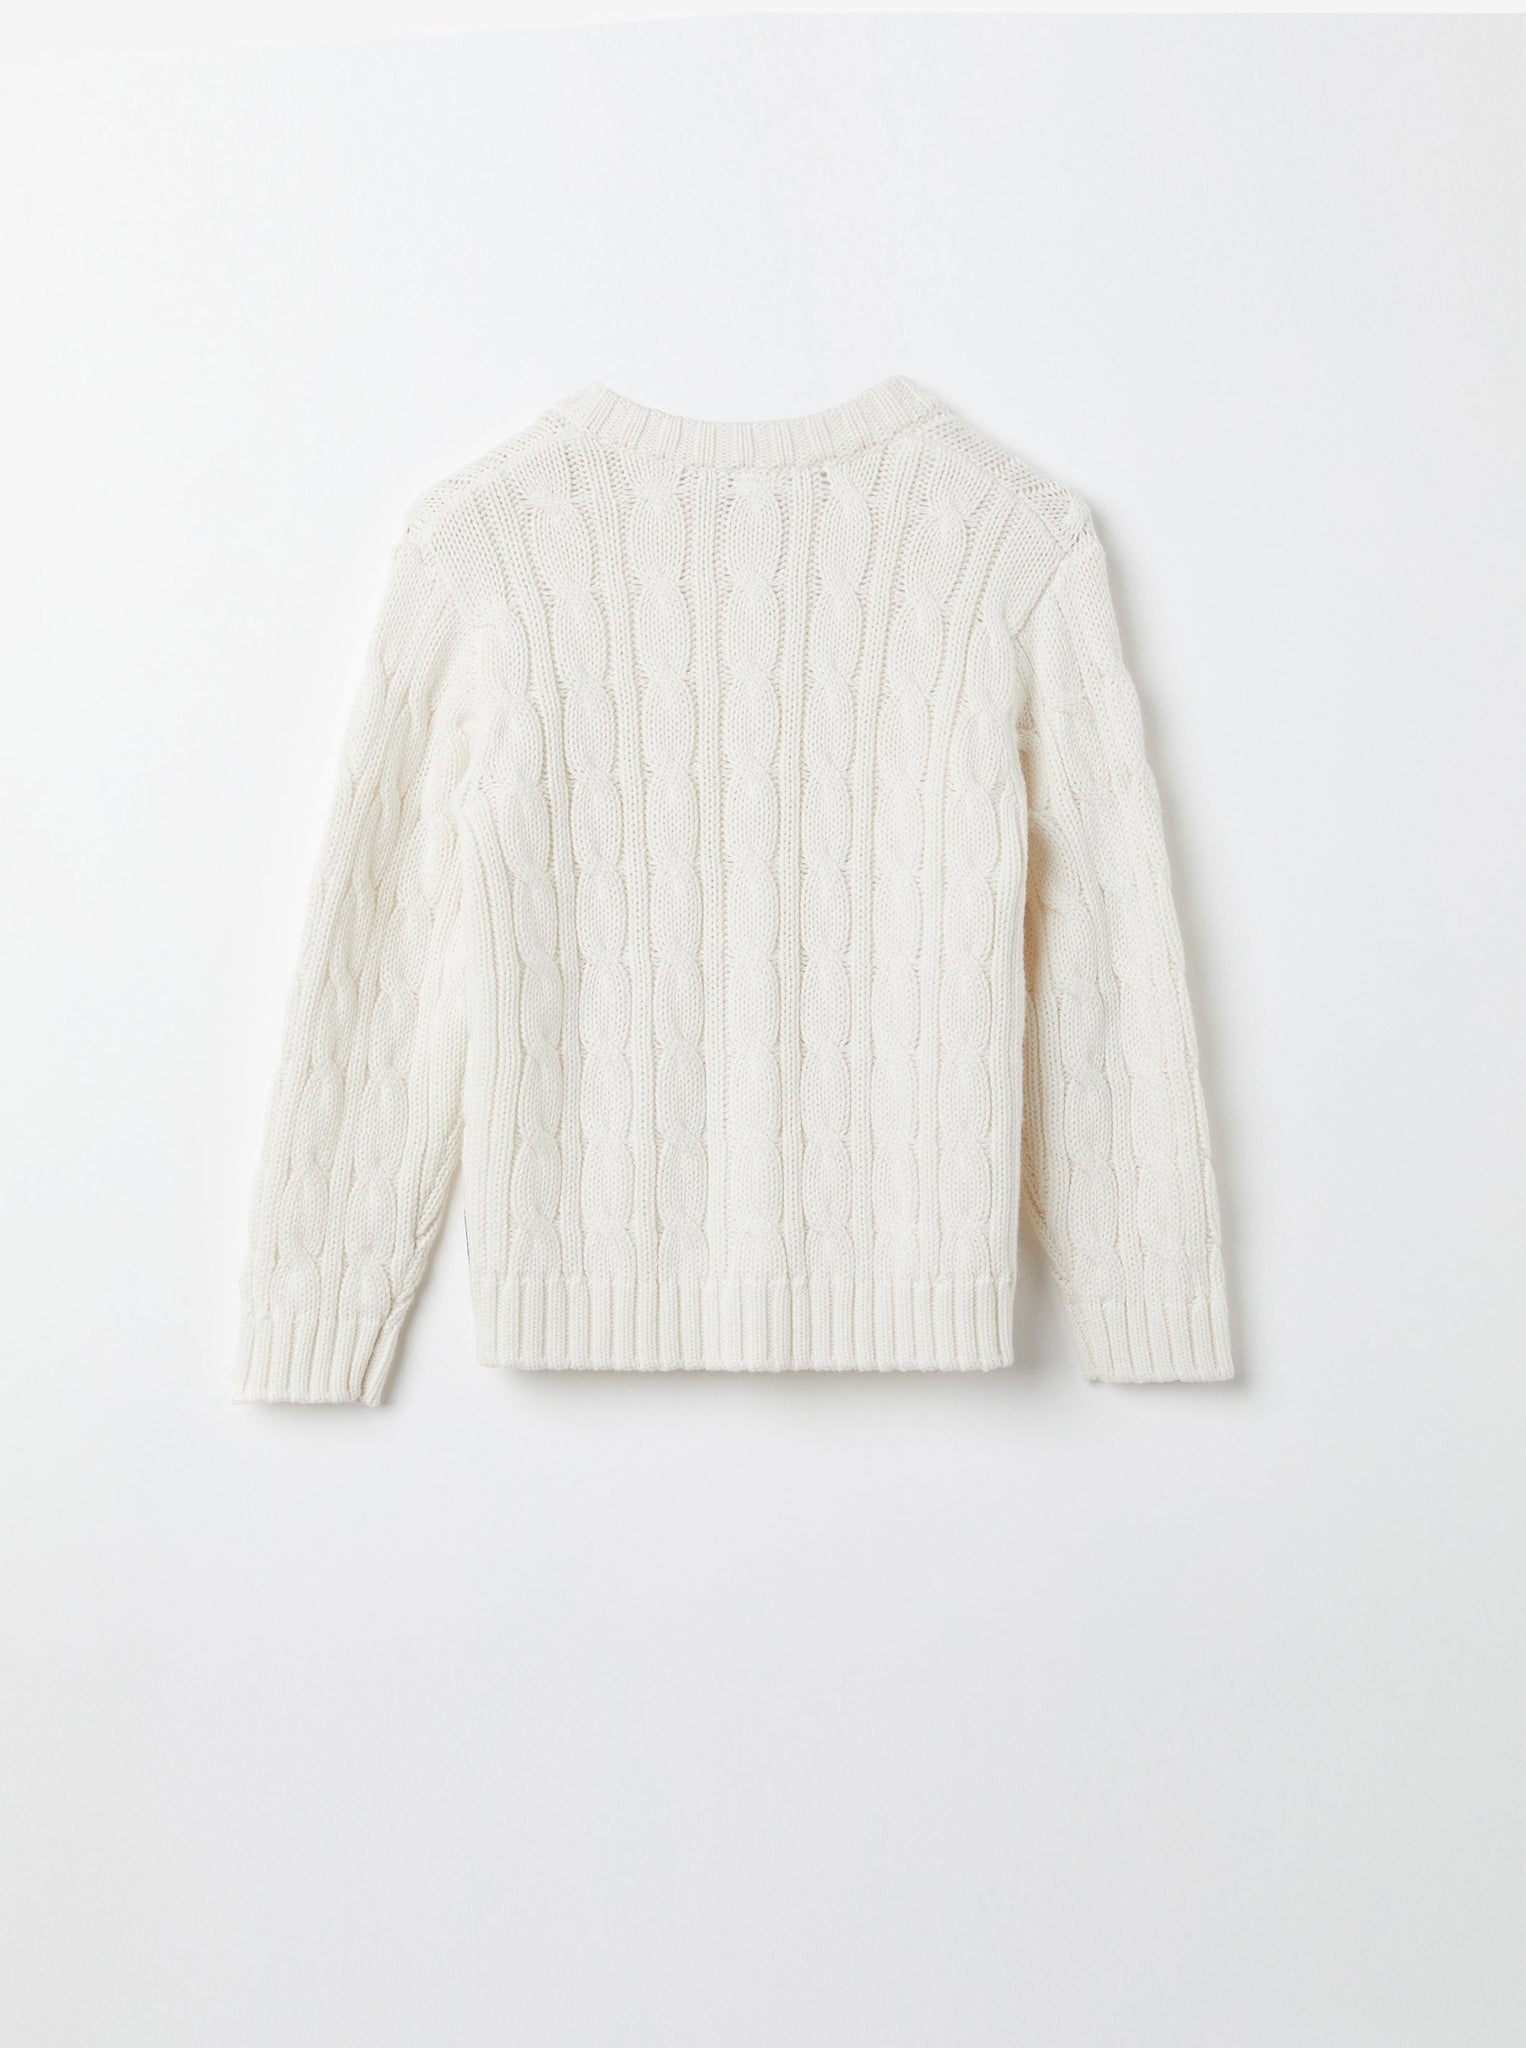 White Cotton Kids Knitted Cardigan from the Polarn O. Pyret kidswear collection. Clothes made using sustainably sourced materials.